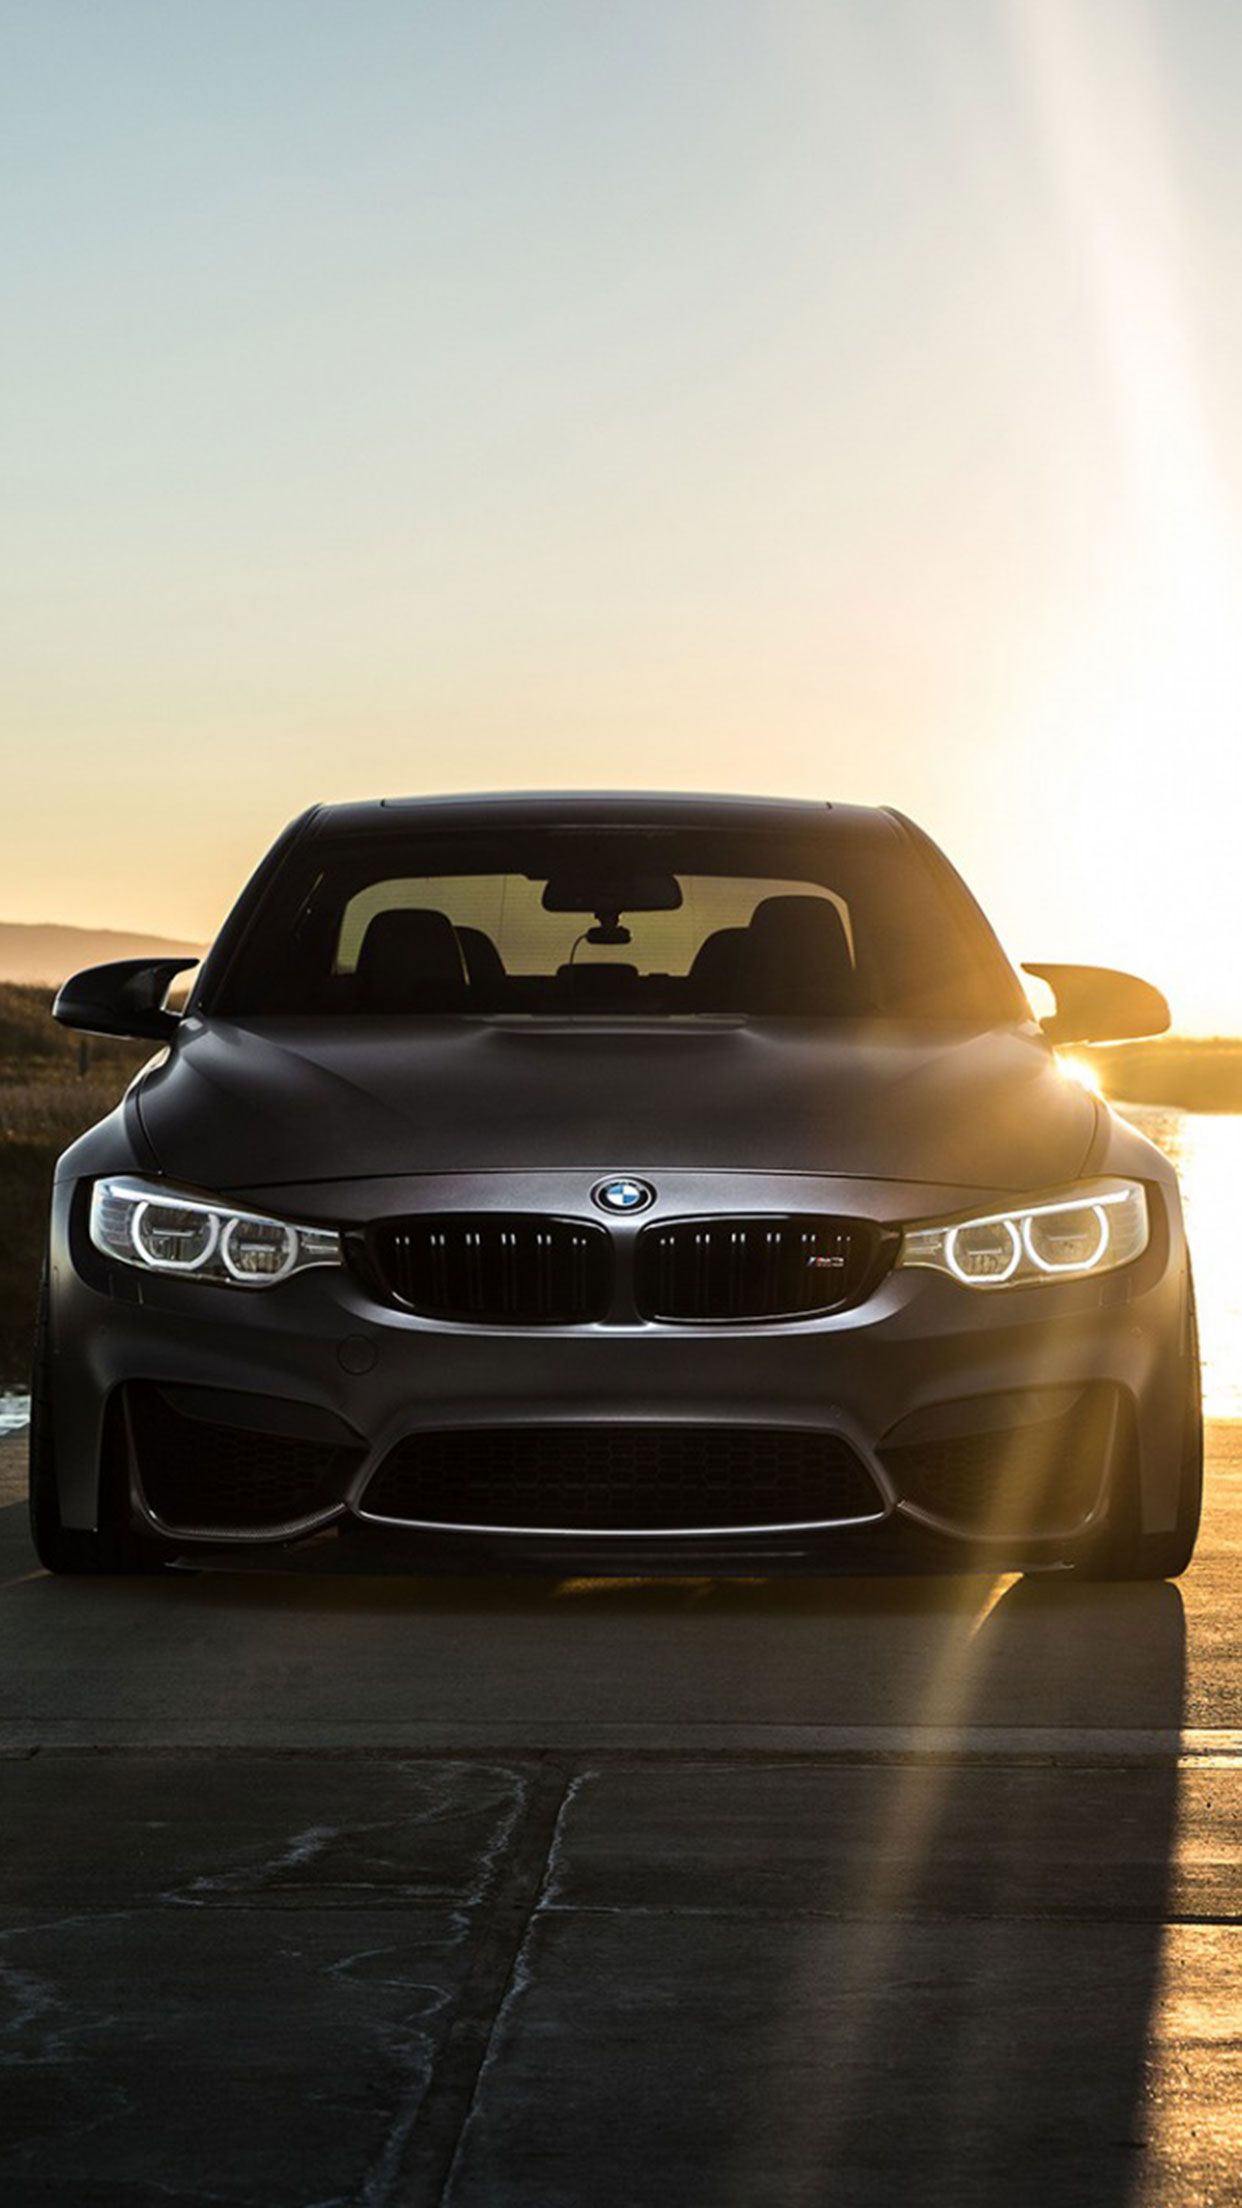 Free Download Grey Bmw Car Wallpaper For Iphone And Android Bmw Car At 1242x28 For Your Desktop Mobile Tablet Explore 55 Hd Android Bmw Wallpapers Hd Android Bmw Wallpapers